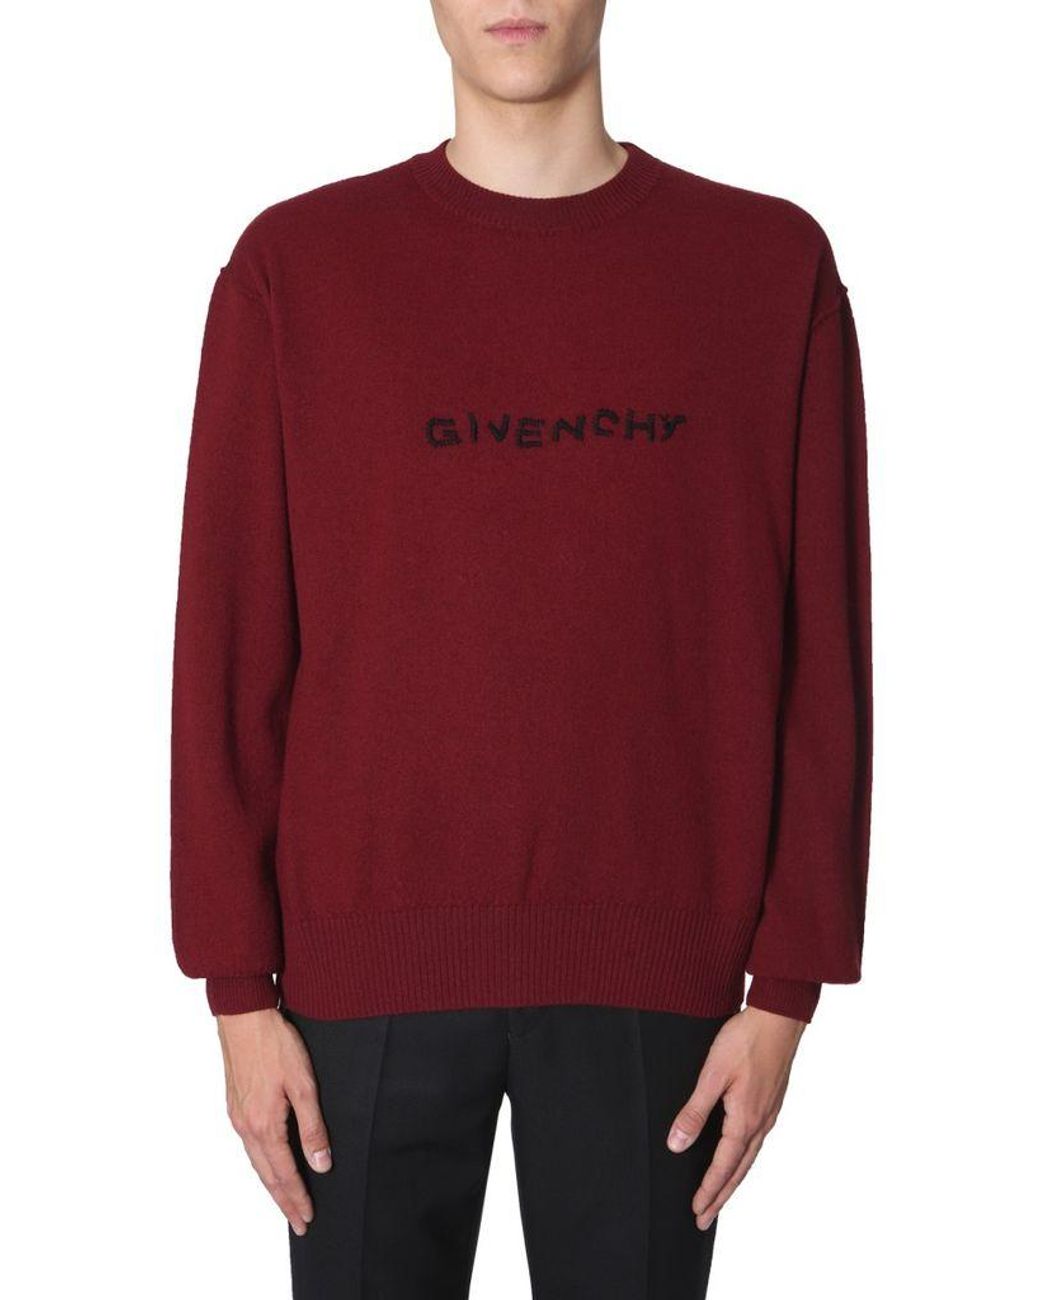 Givenchy Crew Neck Sweater in Red for Men - Lyst